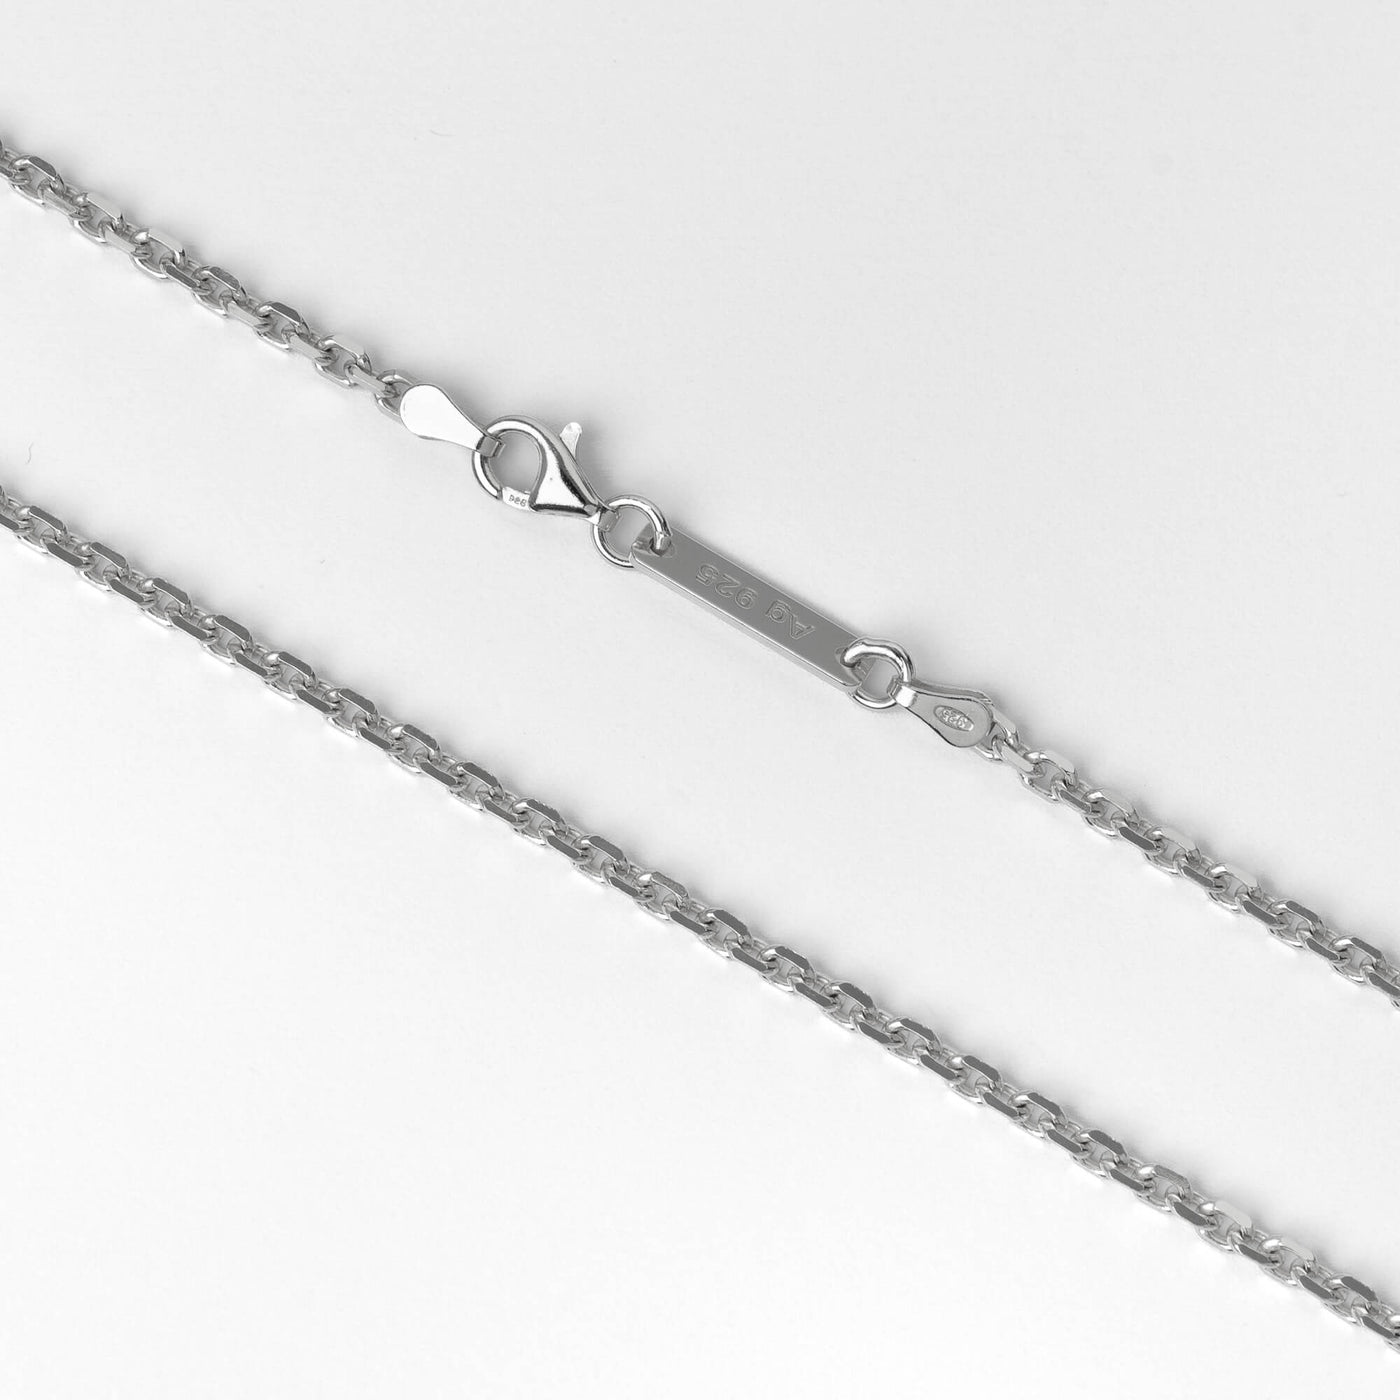 PEA CHAIN BRACELET 925 SILVER RHODIUM PLATED 2,80MM